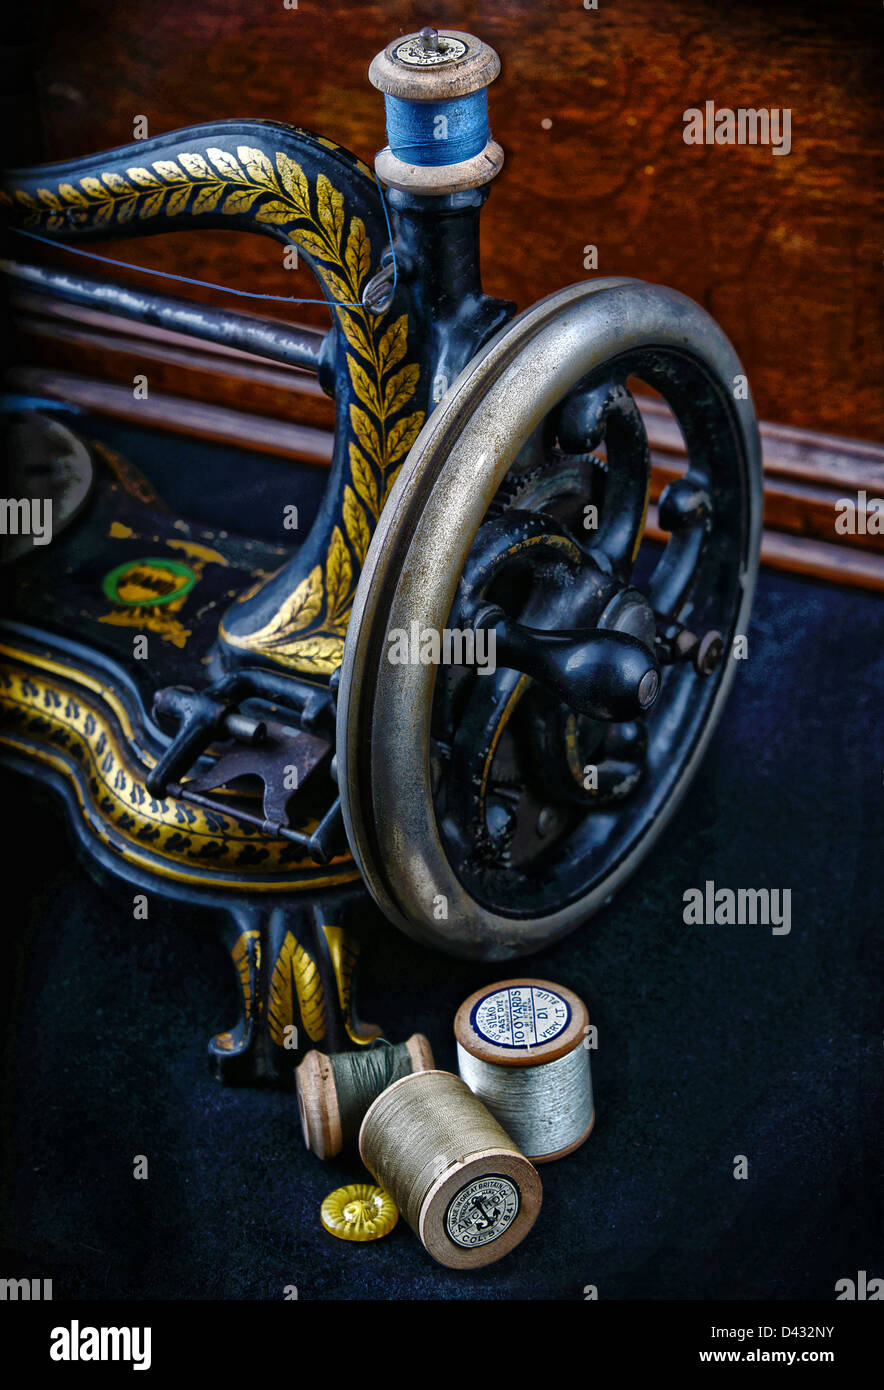 A vintage sewing machine and thread Stock Photo